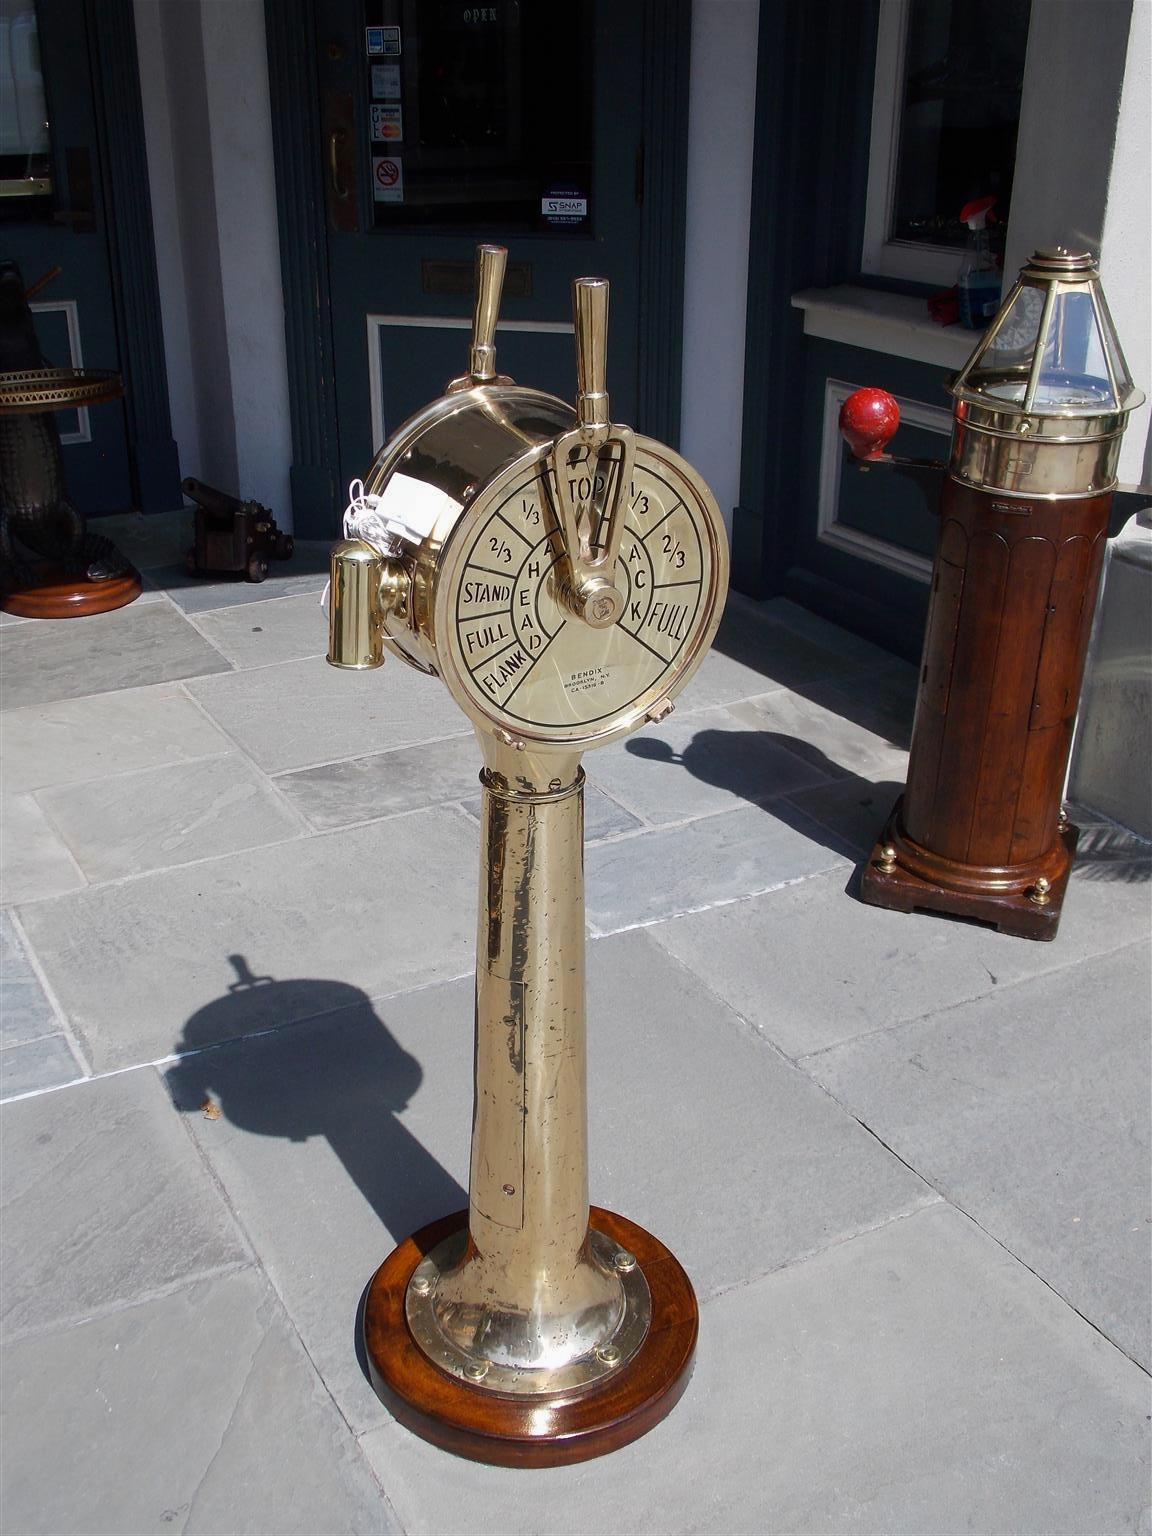 American brass ship's double engine order telegraph mounted on circular mahogany base.  E. O. T. has been electrified and has a faint bell ring when changing positions. Bendix Corporation, Brooklyn, NY. Model # CA-15316-B. Early 20th century.